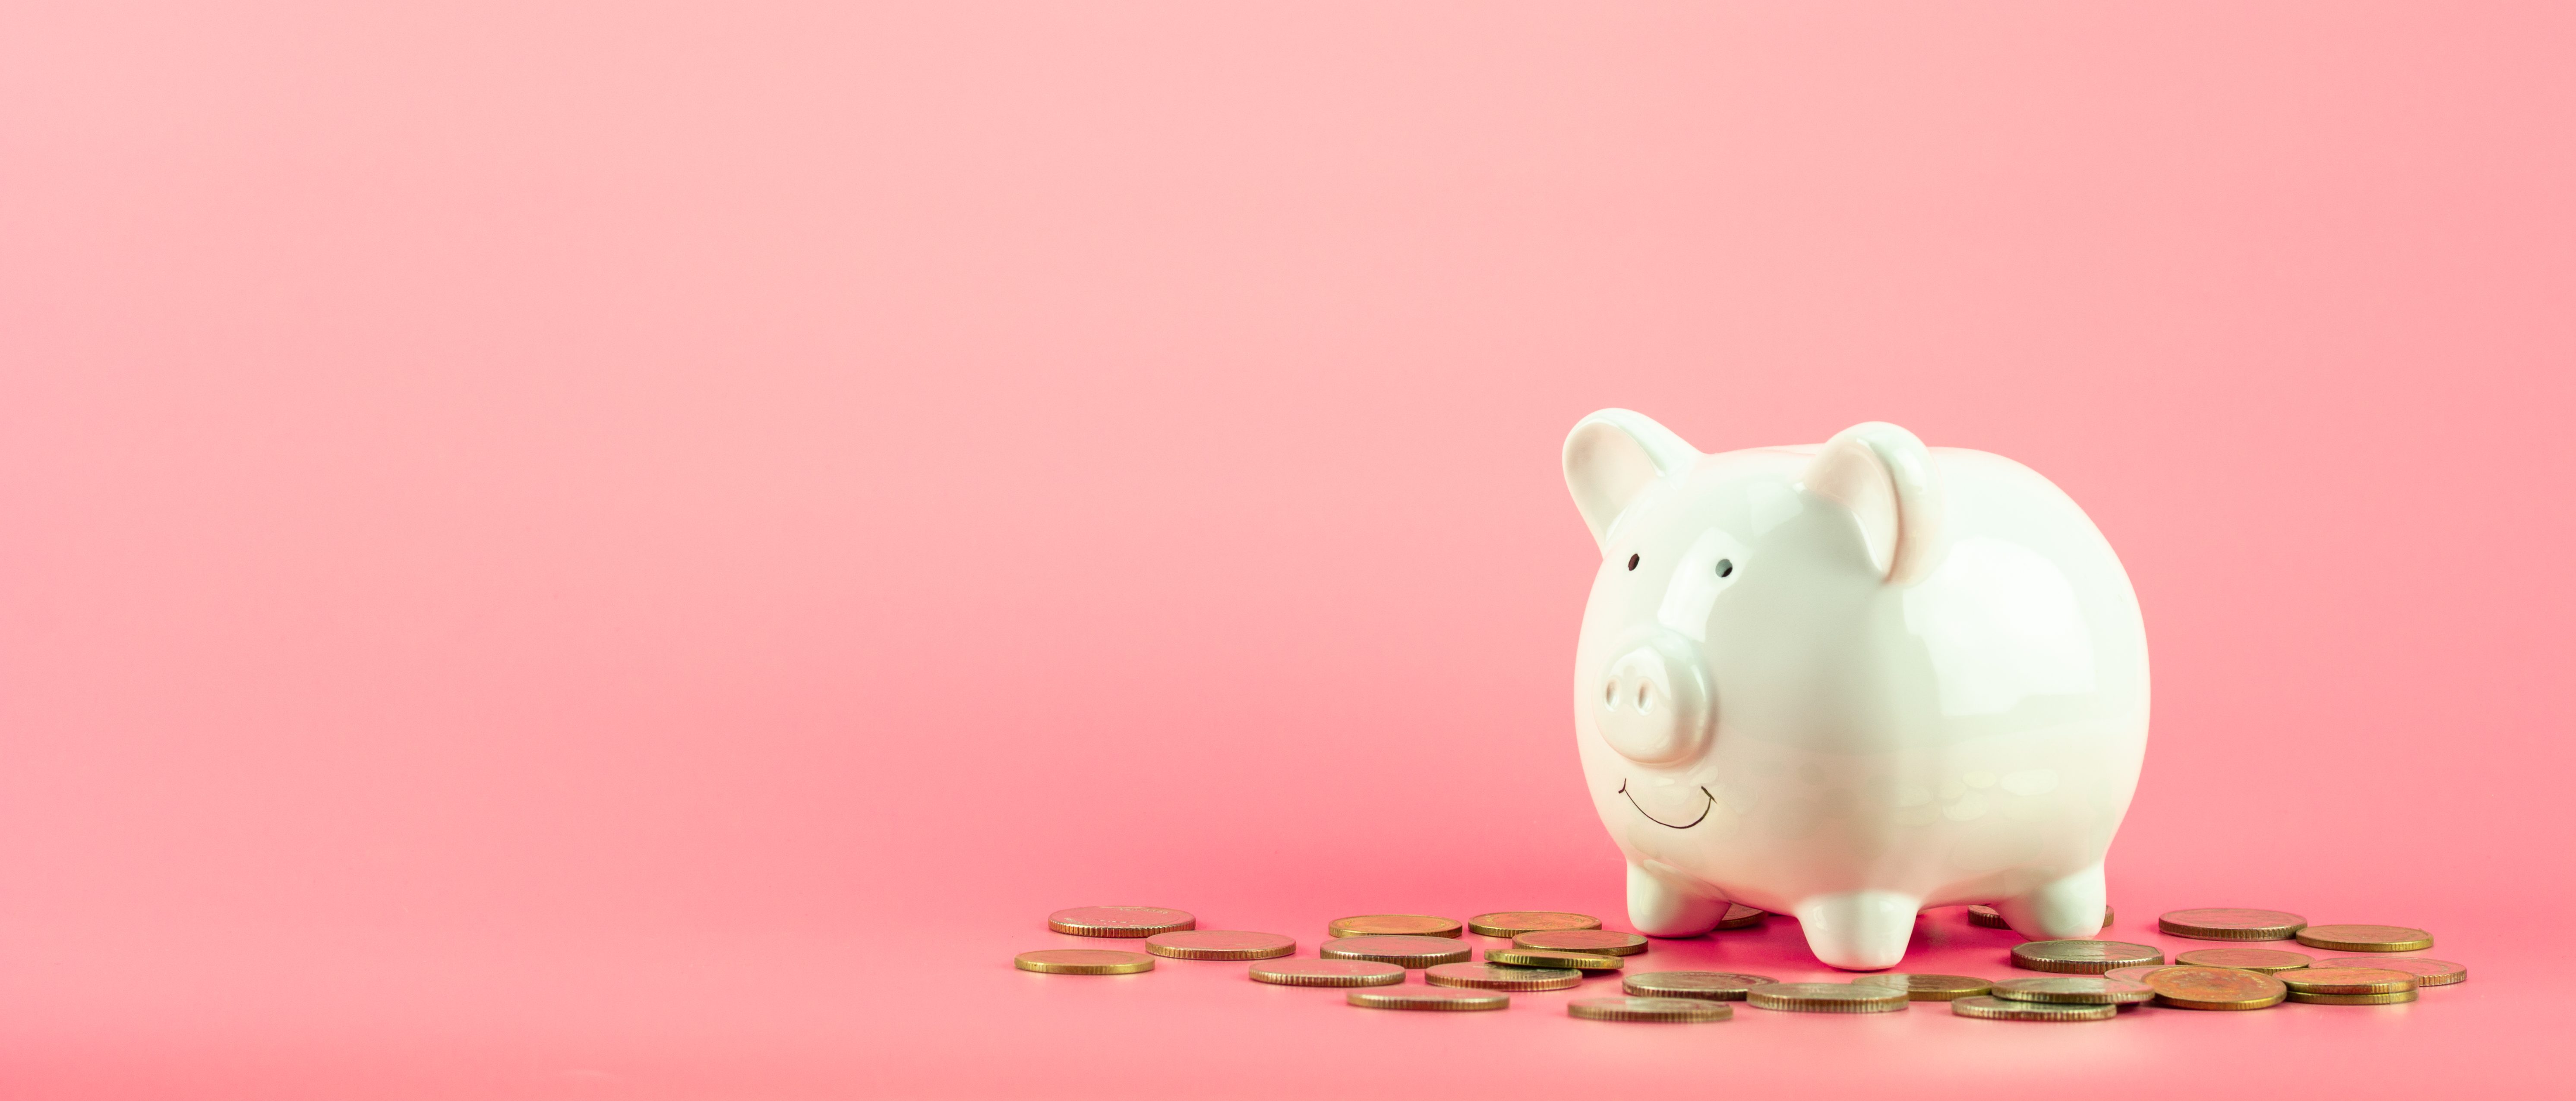 piggy bank and a golden coins pile on pink background. - save and management concept.